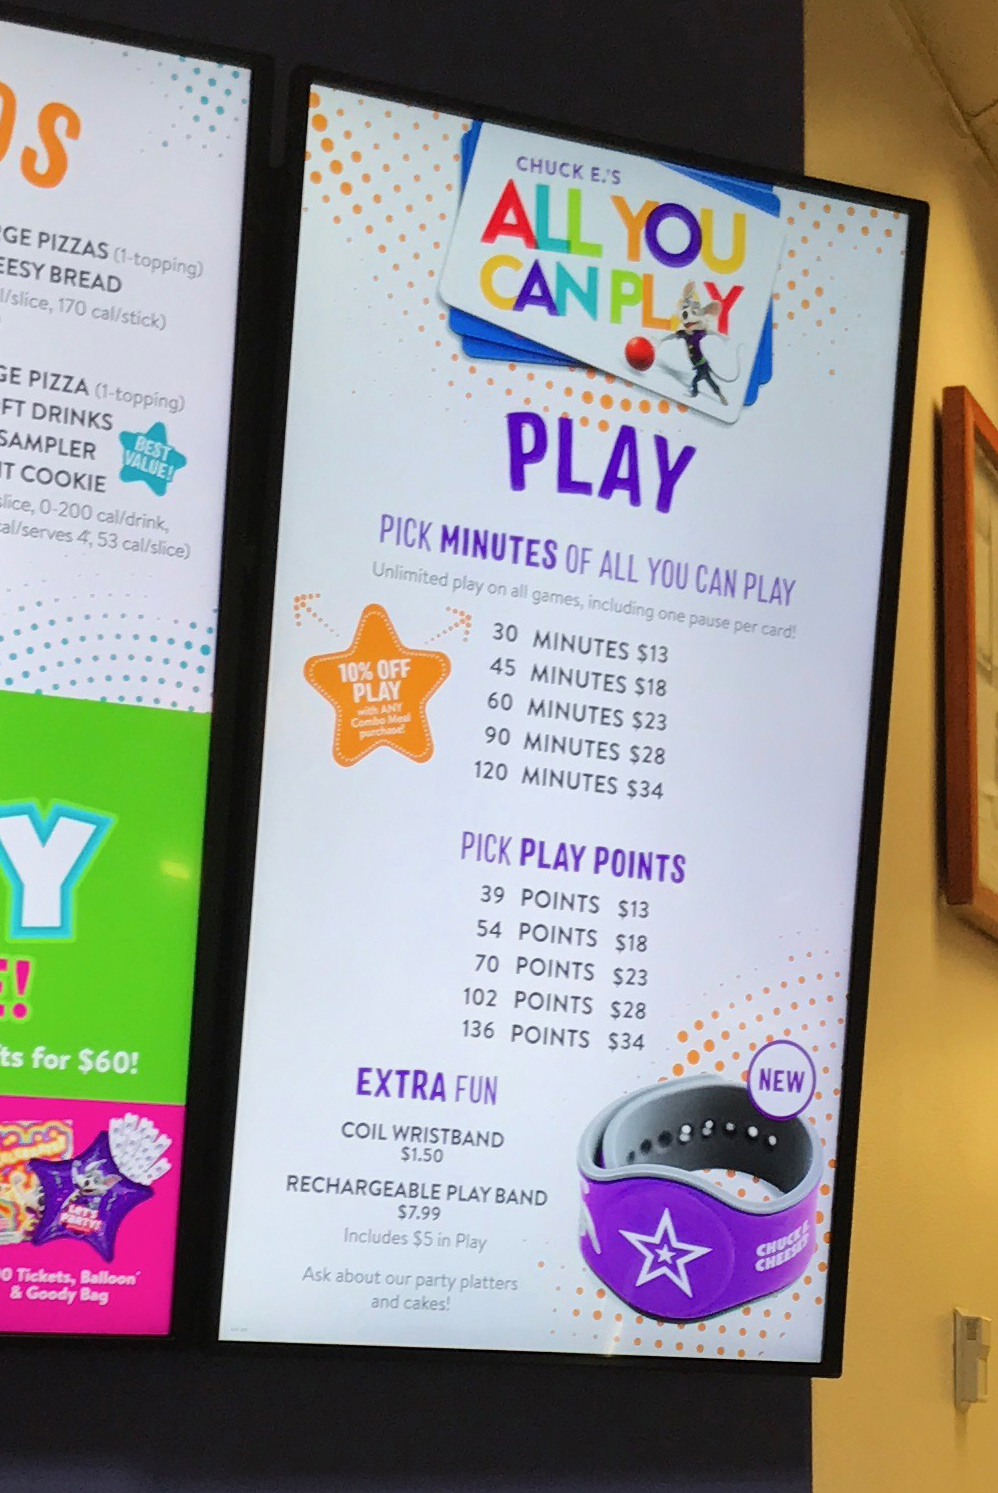 Chuck E. Cheese Players Back with Play Promo